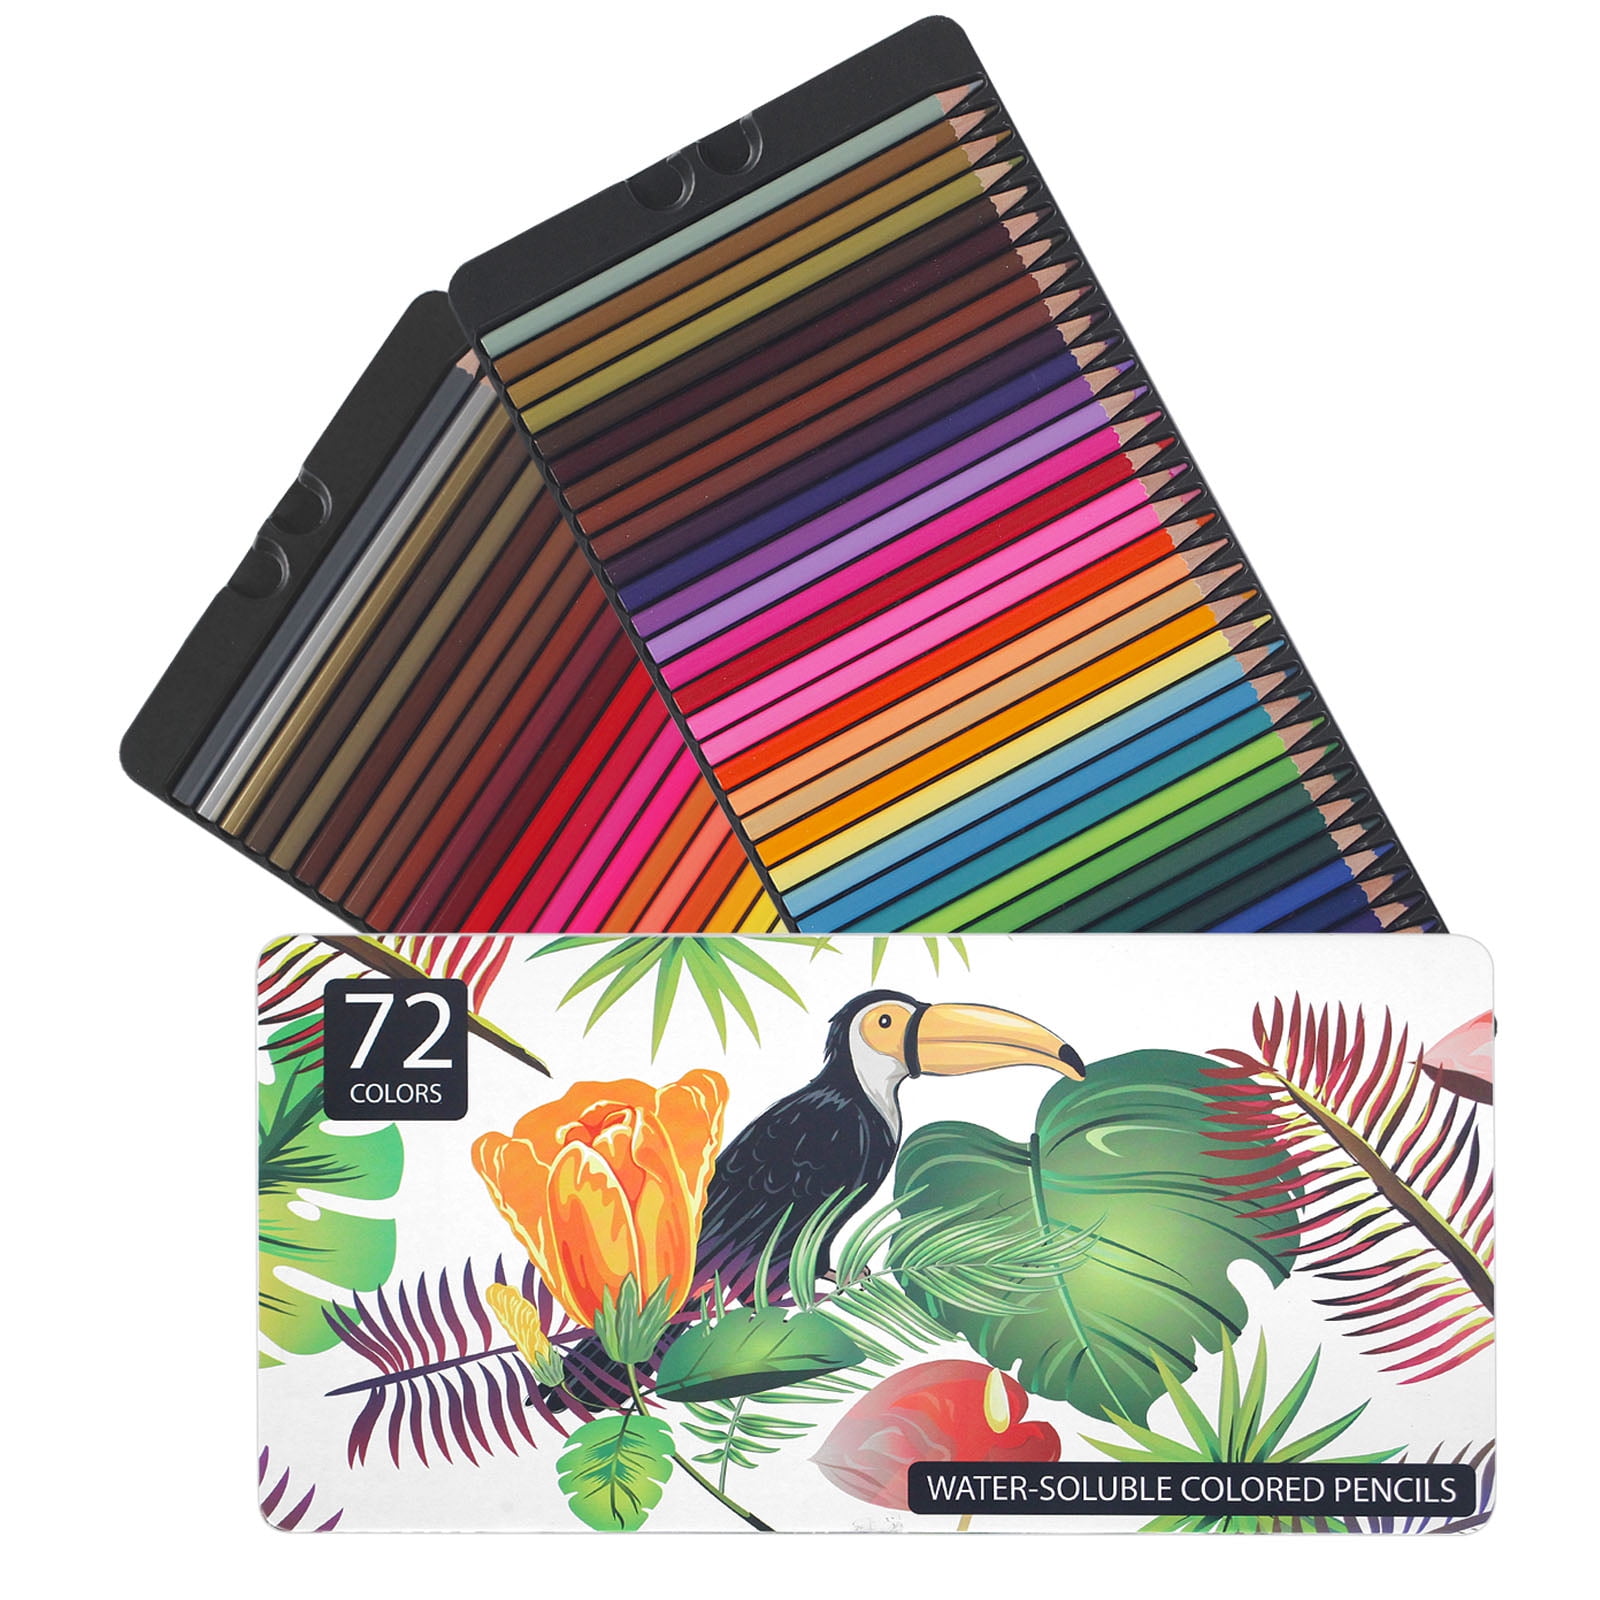 EooUooIP Colored Pencils, 24 Pcs Professional Coloured Pencils Drawing Pencils, Oil-Based Artist Pencil Set, Ideal for Adult and Artists Sketching